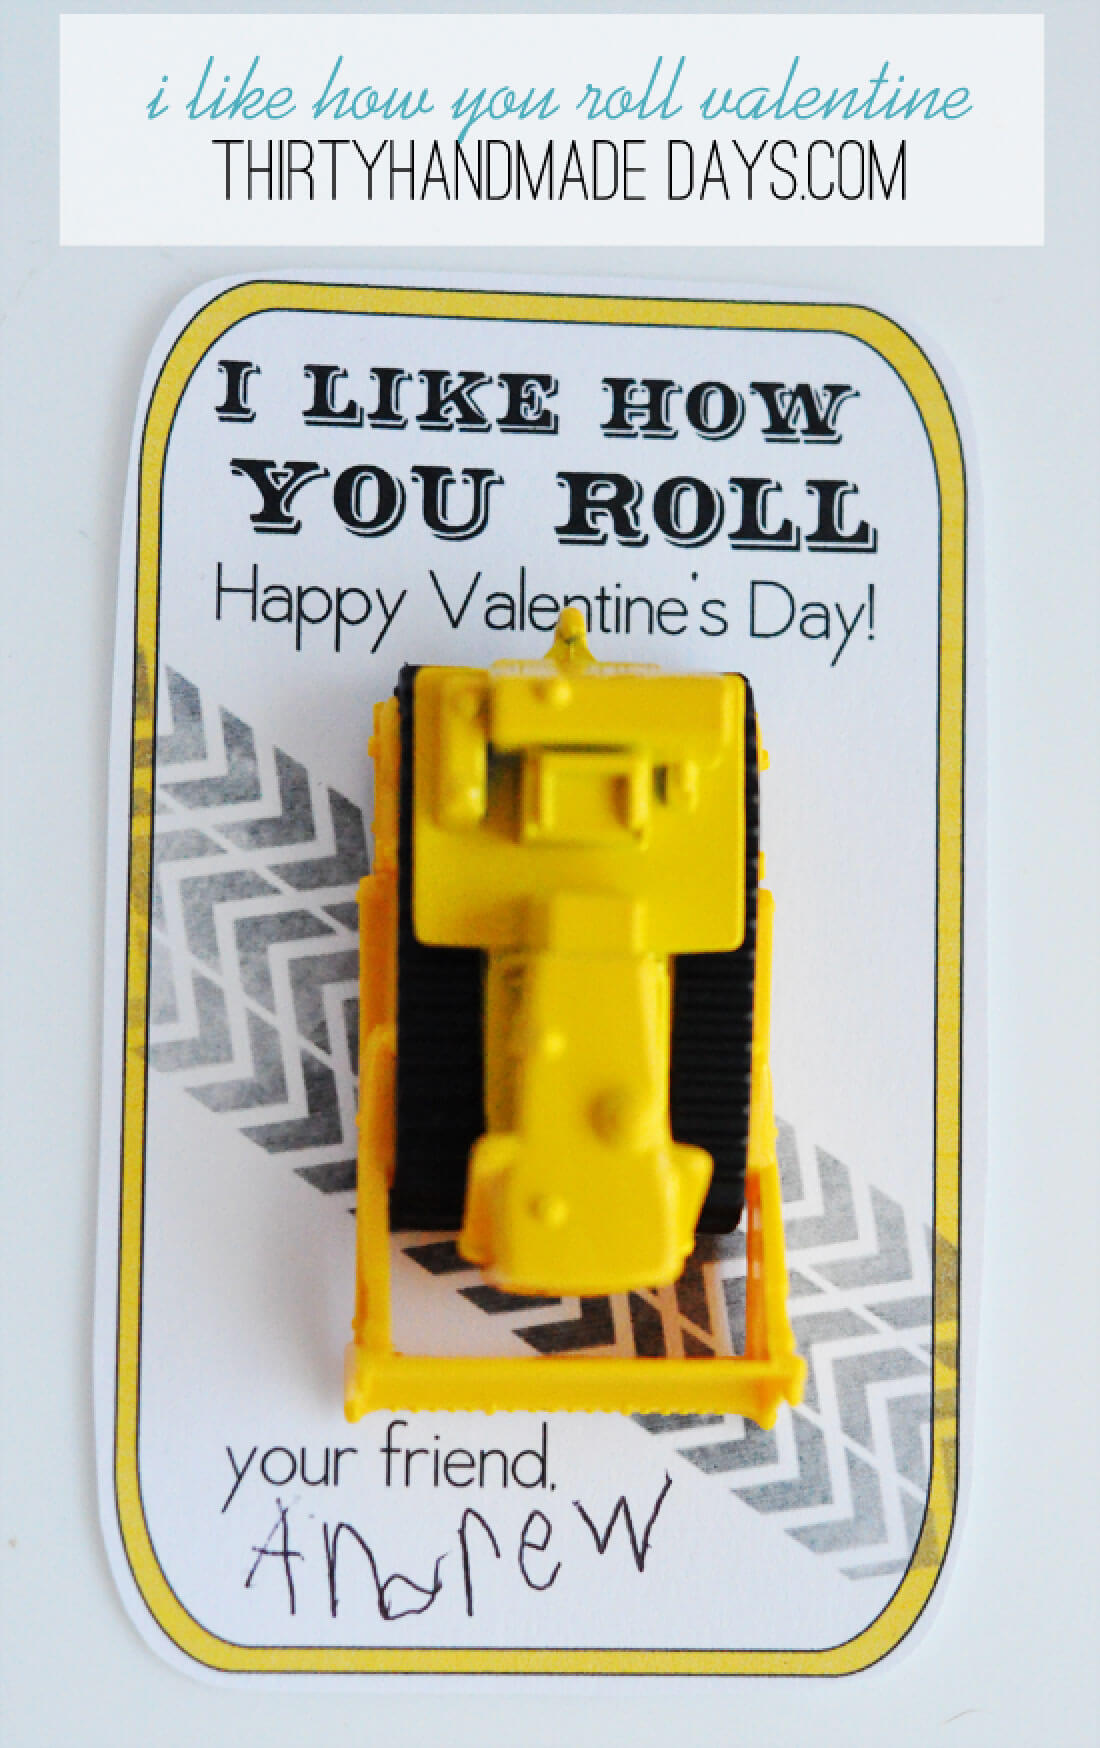 Printable Valentines Day Ideas - this "I like how you roll" is perfect for boys! from www.thirtyhandmadedays.com